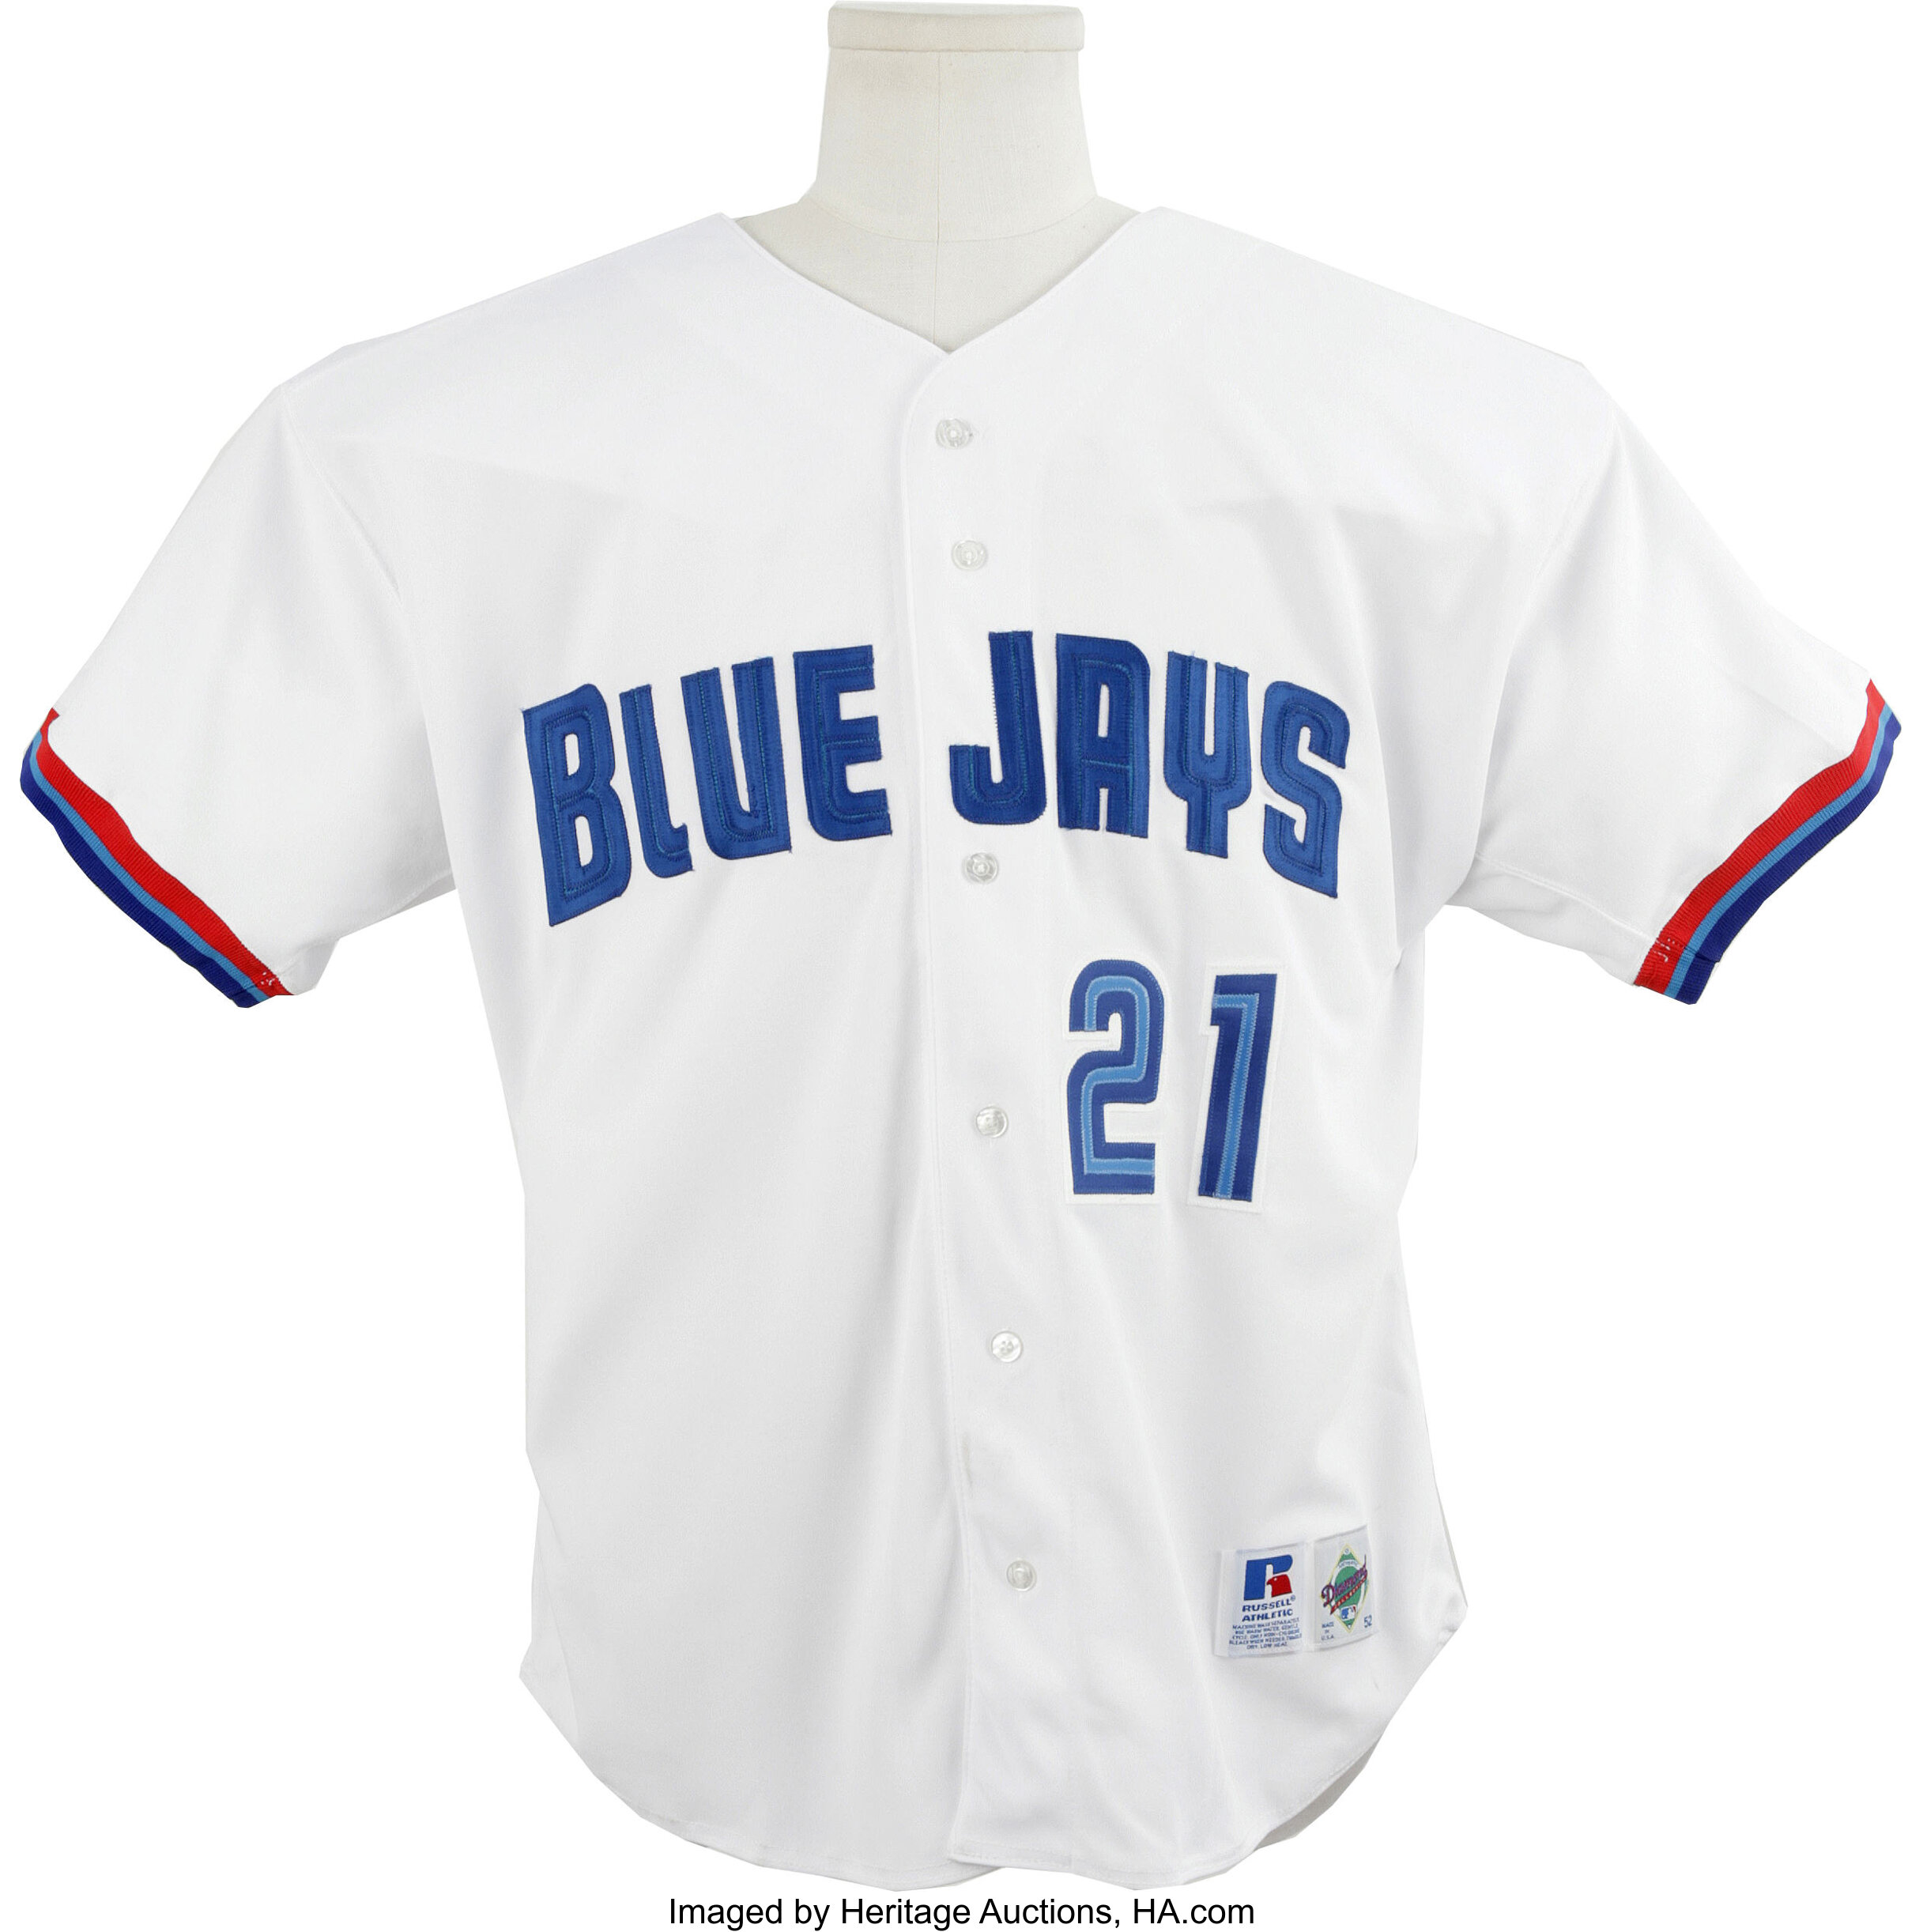 Roger Clemens Signed Toronto Blue Jays Jersey. Each year he, Lot #61136